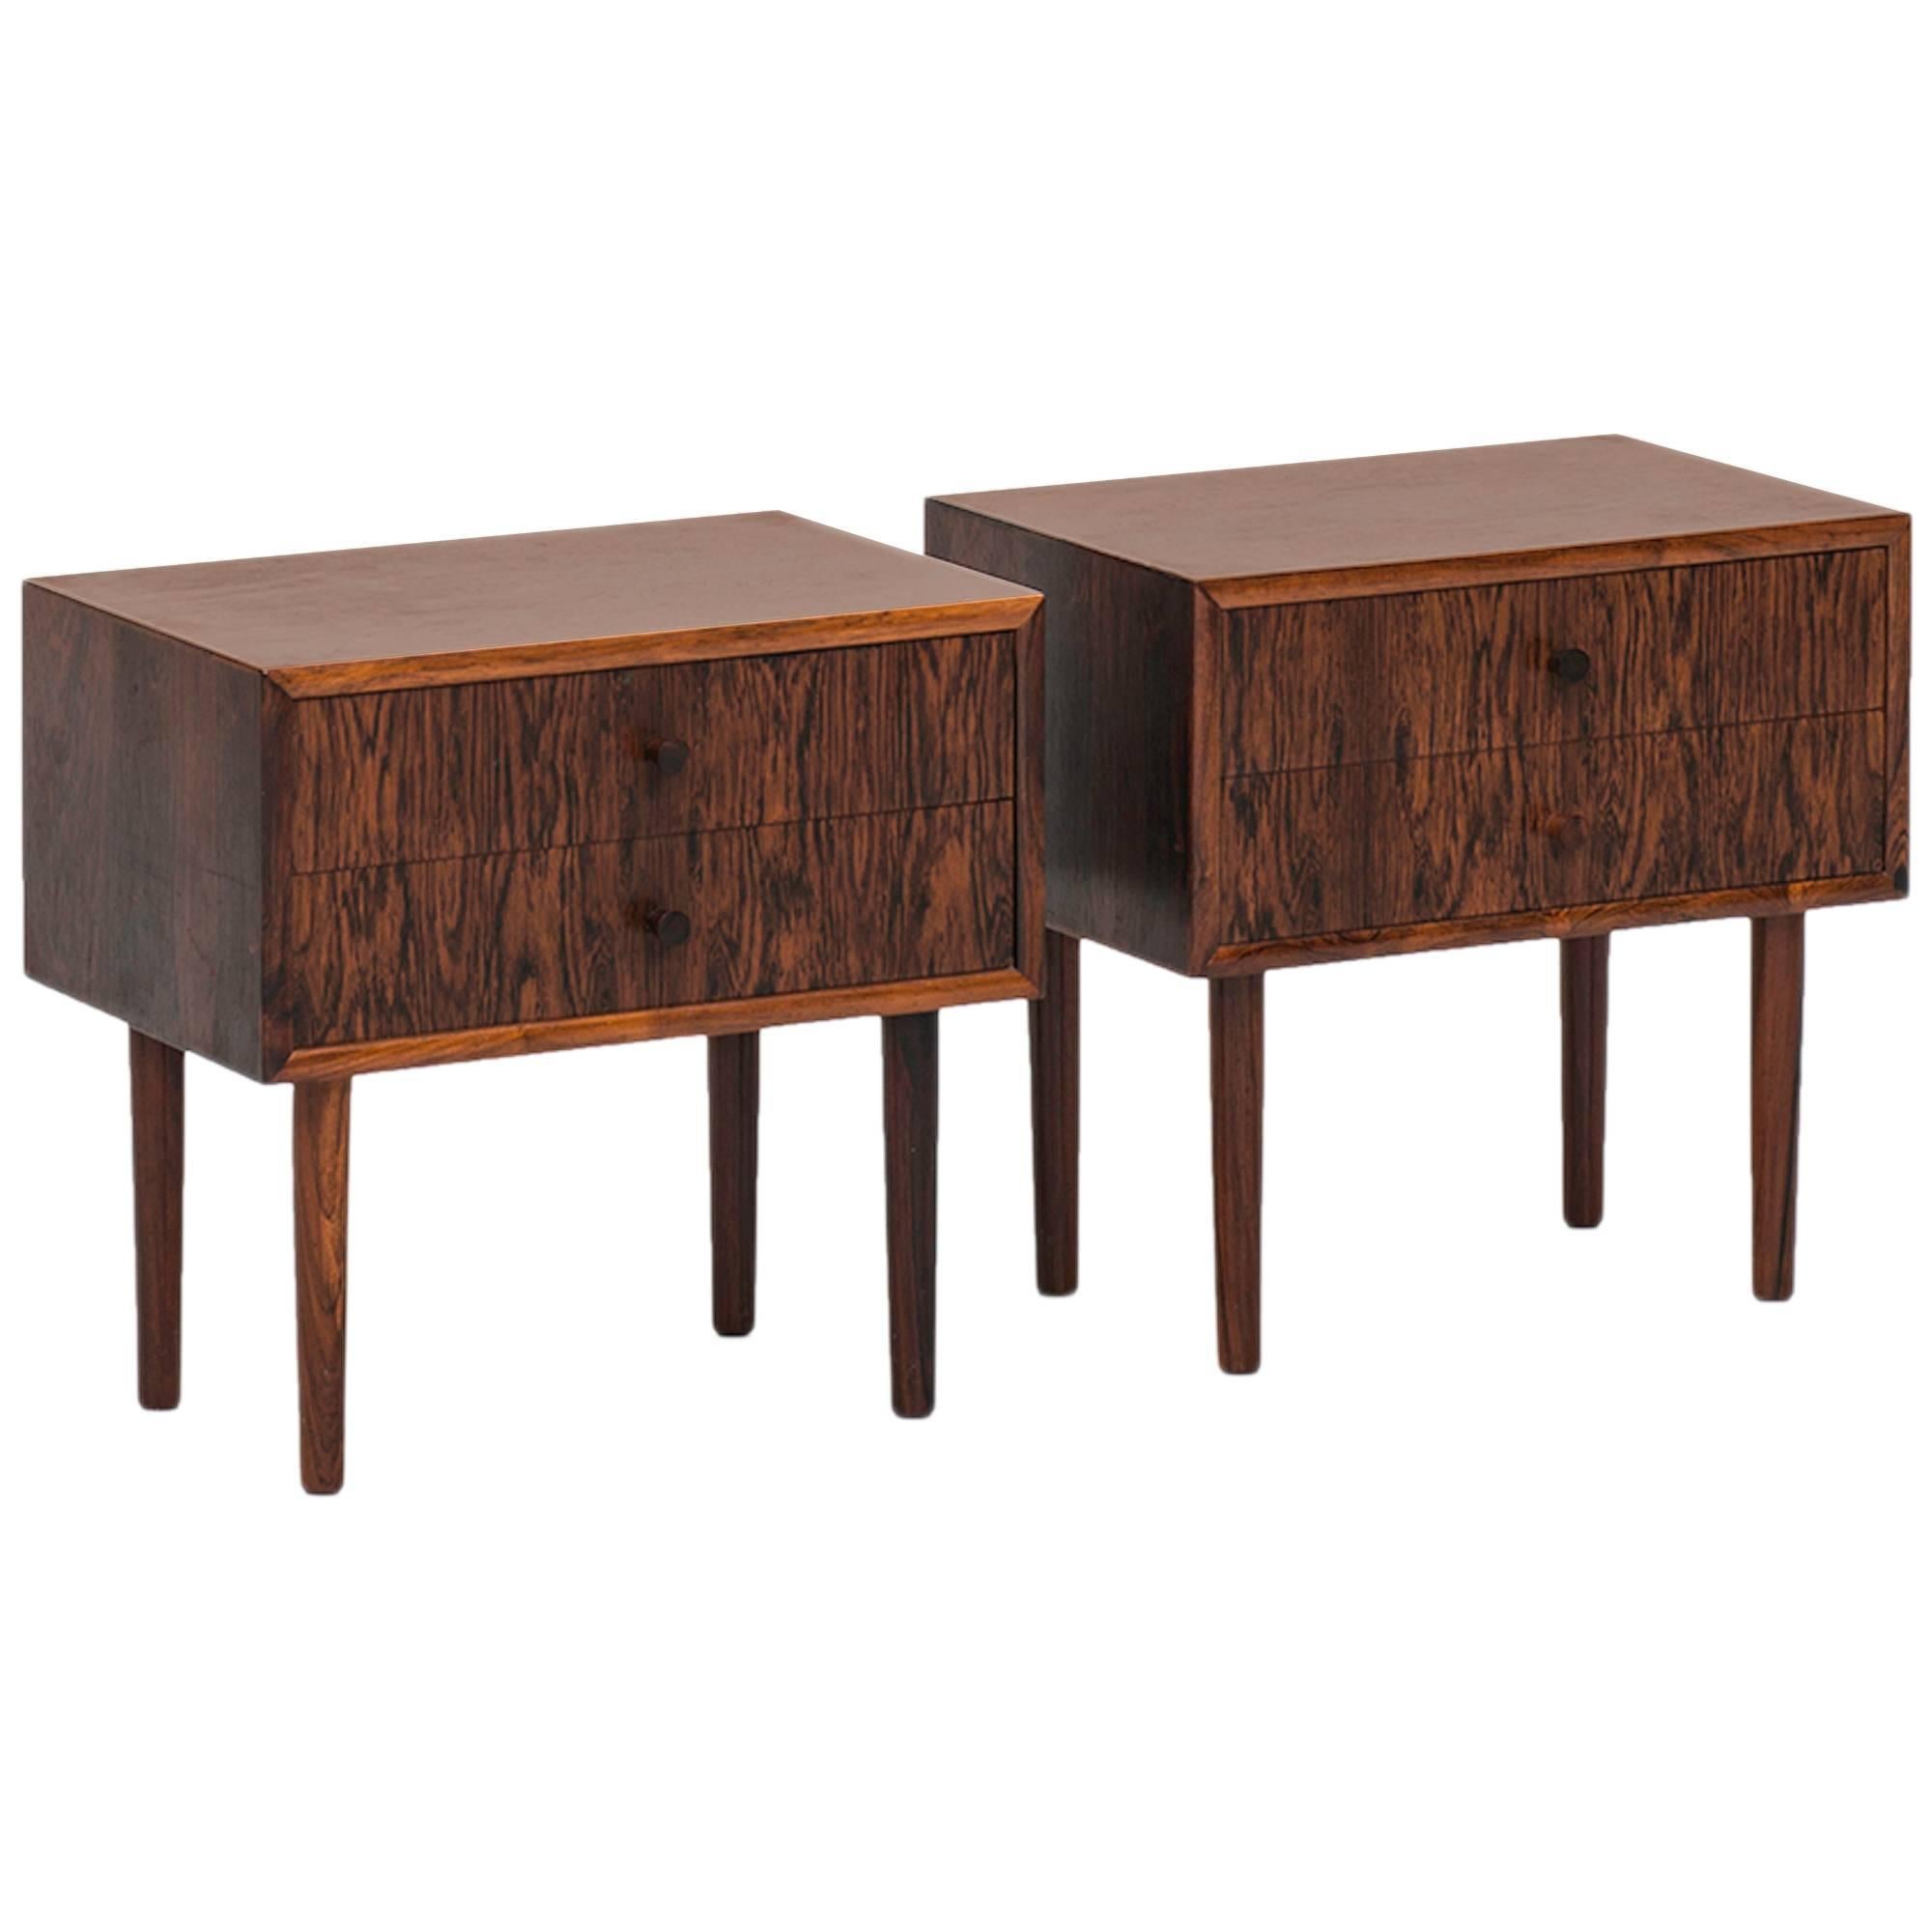 A pair of bedside tables in rosewood produced in Denmark